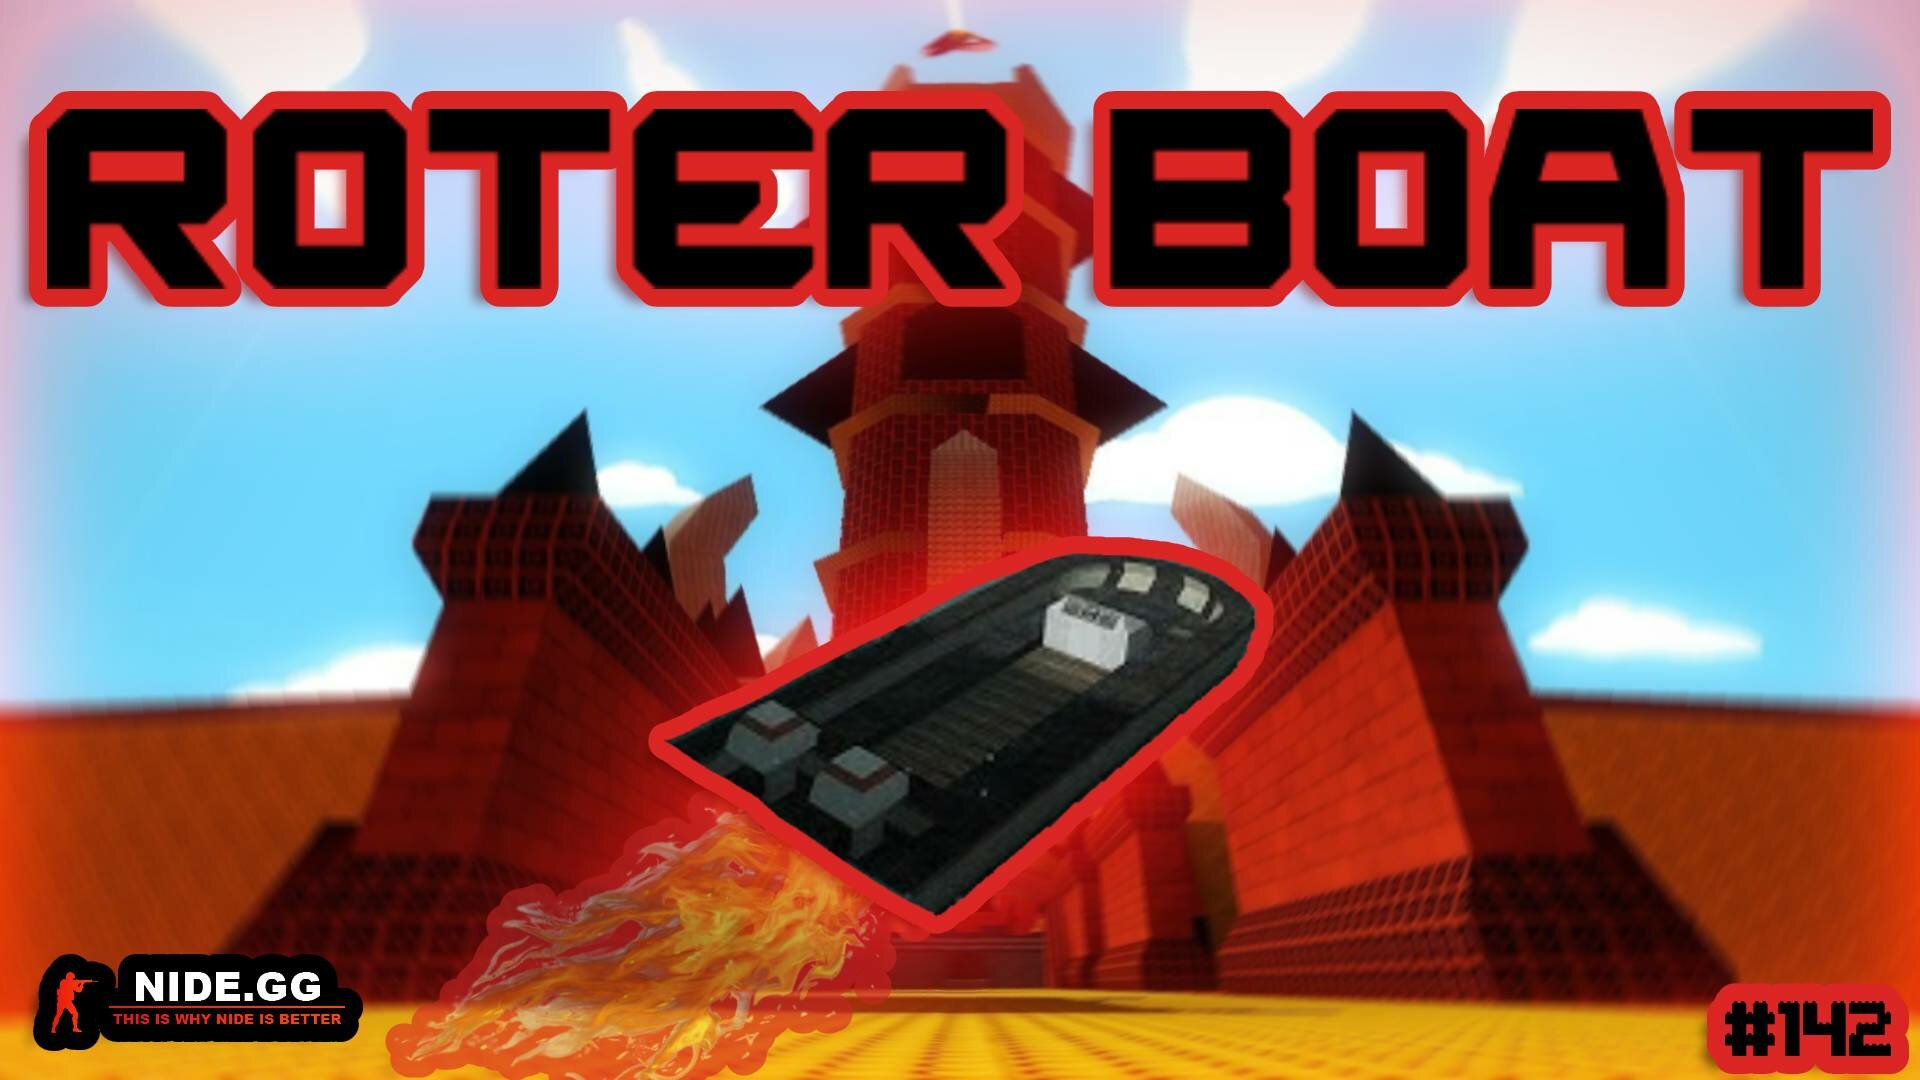 More information about "CSS Zombie Escape Mini-Event #142 - ROTER BOAT"